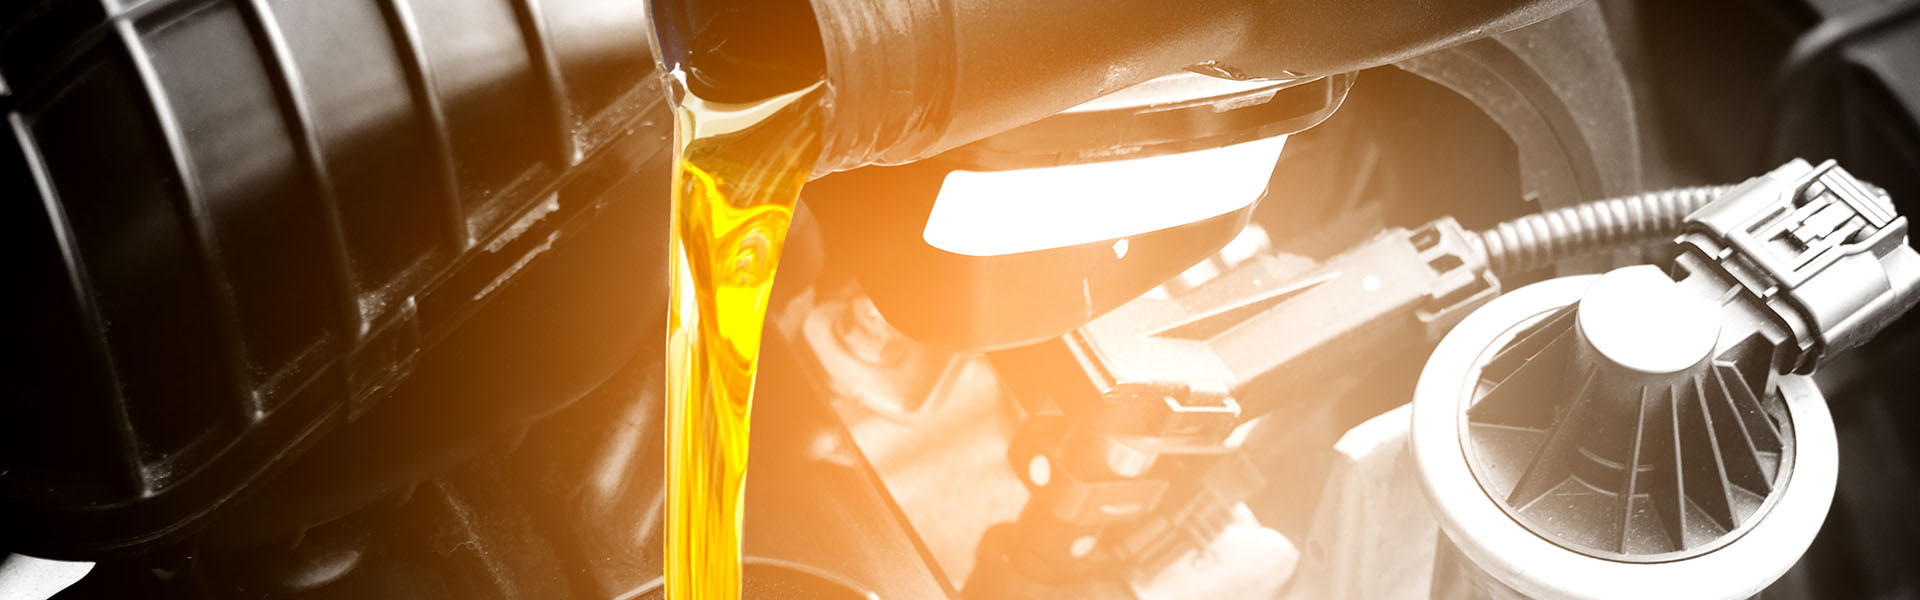 Signs It's Time for an Oil Change - Evans Tire & Service Centers